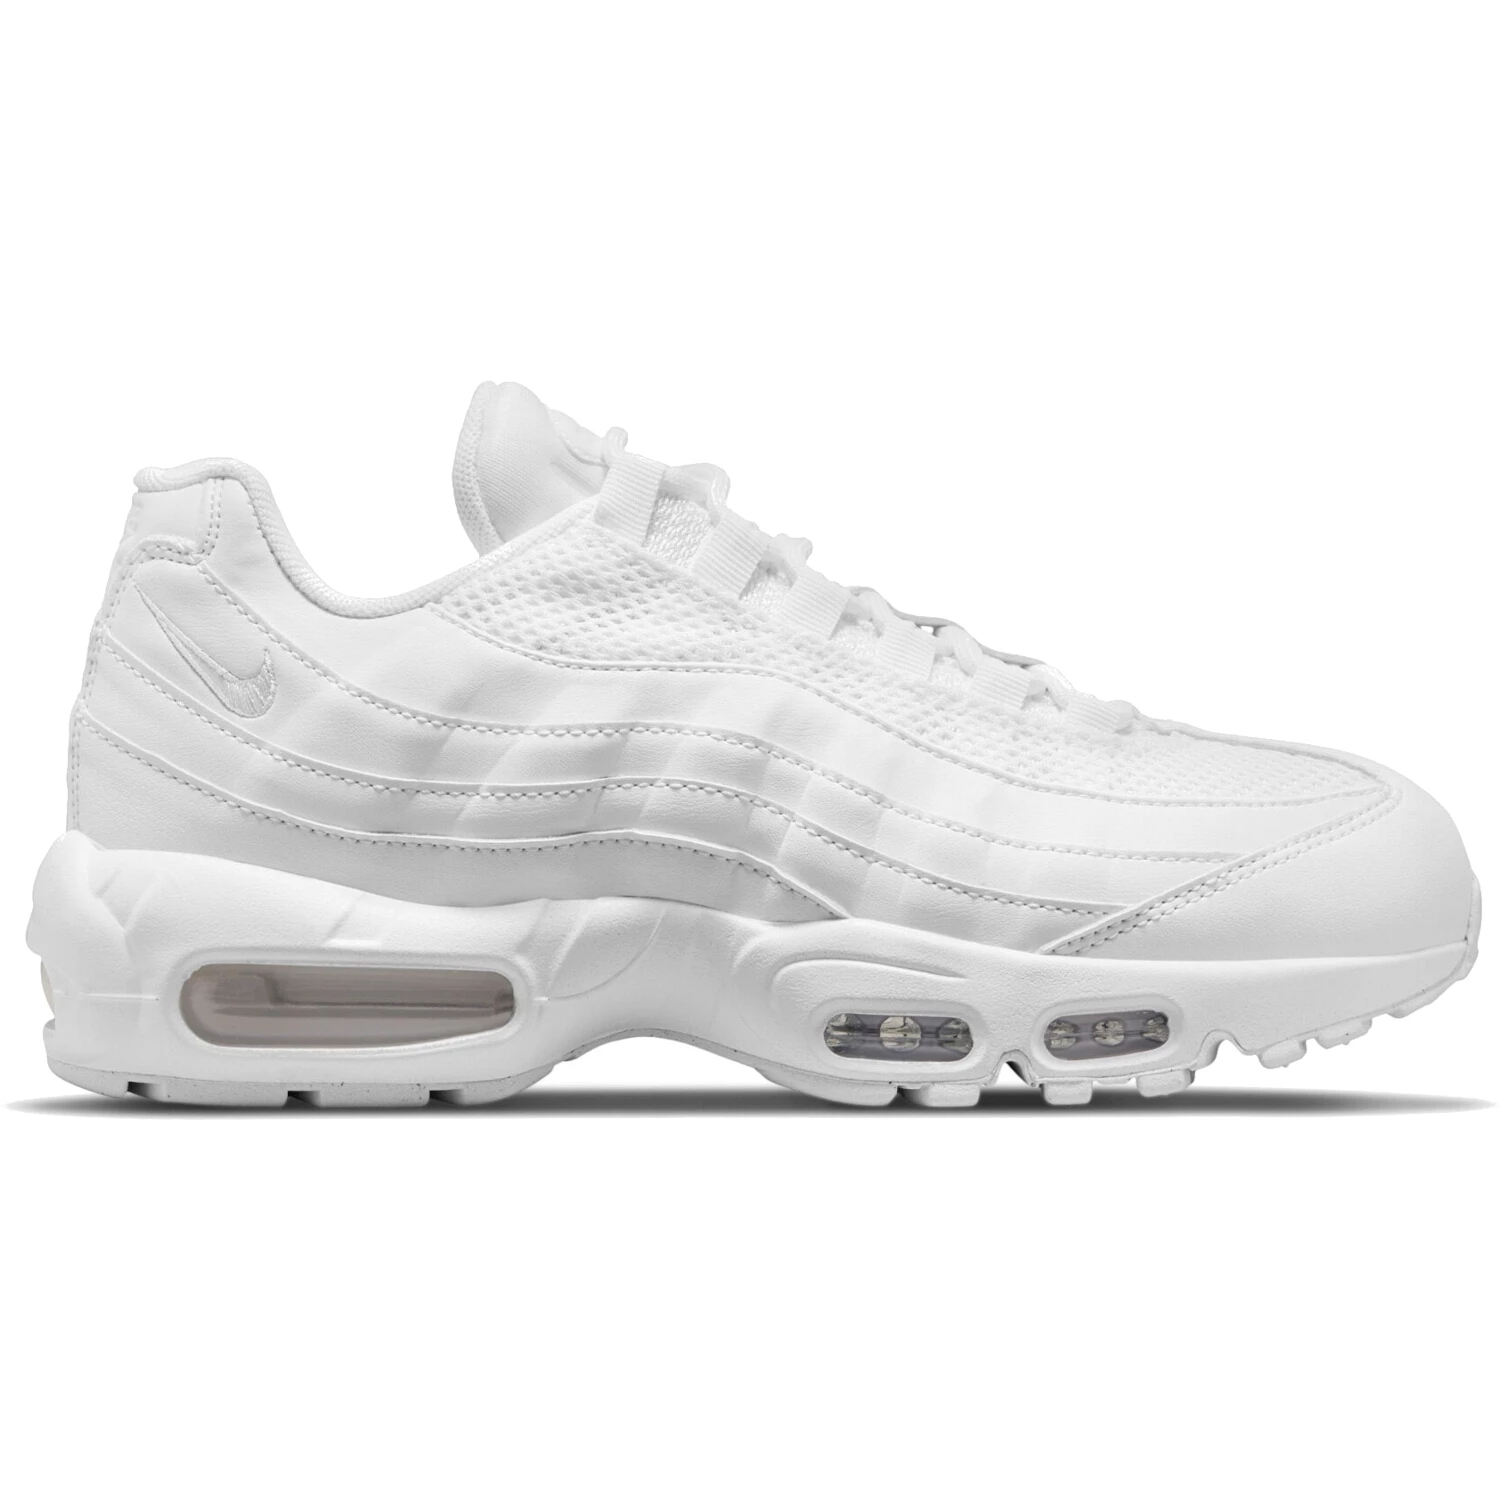 NIKE MAX 95 DAMES SNEAKERS DH8015-100 - wbsport.nl